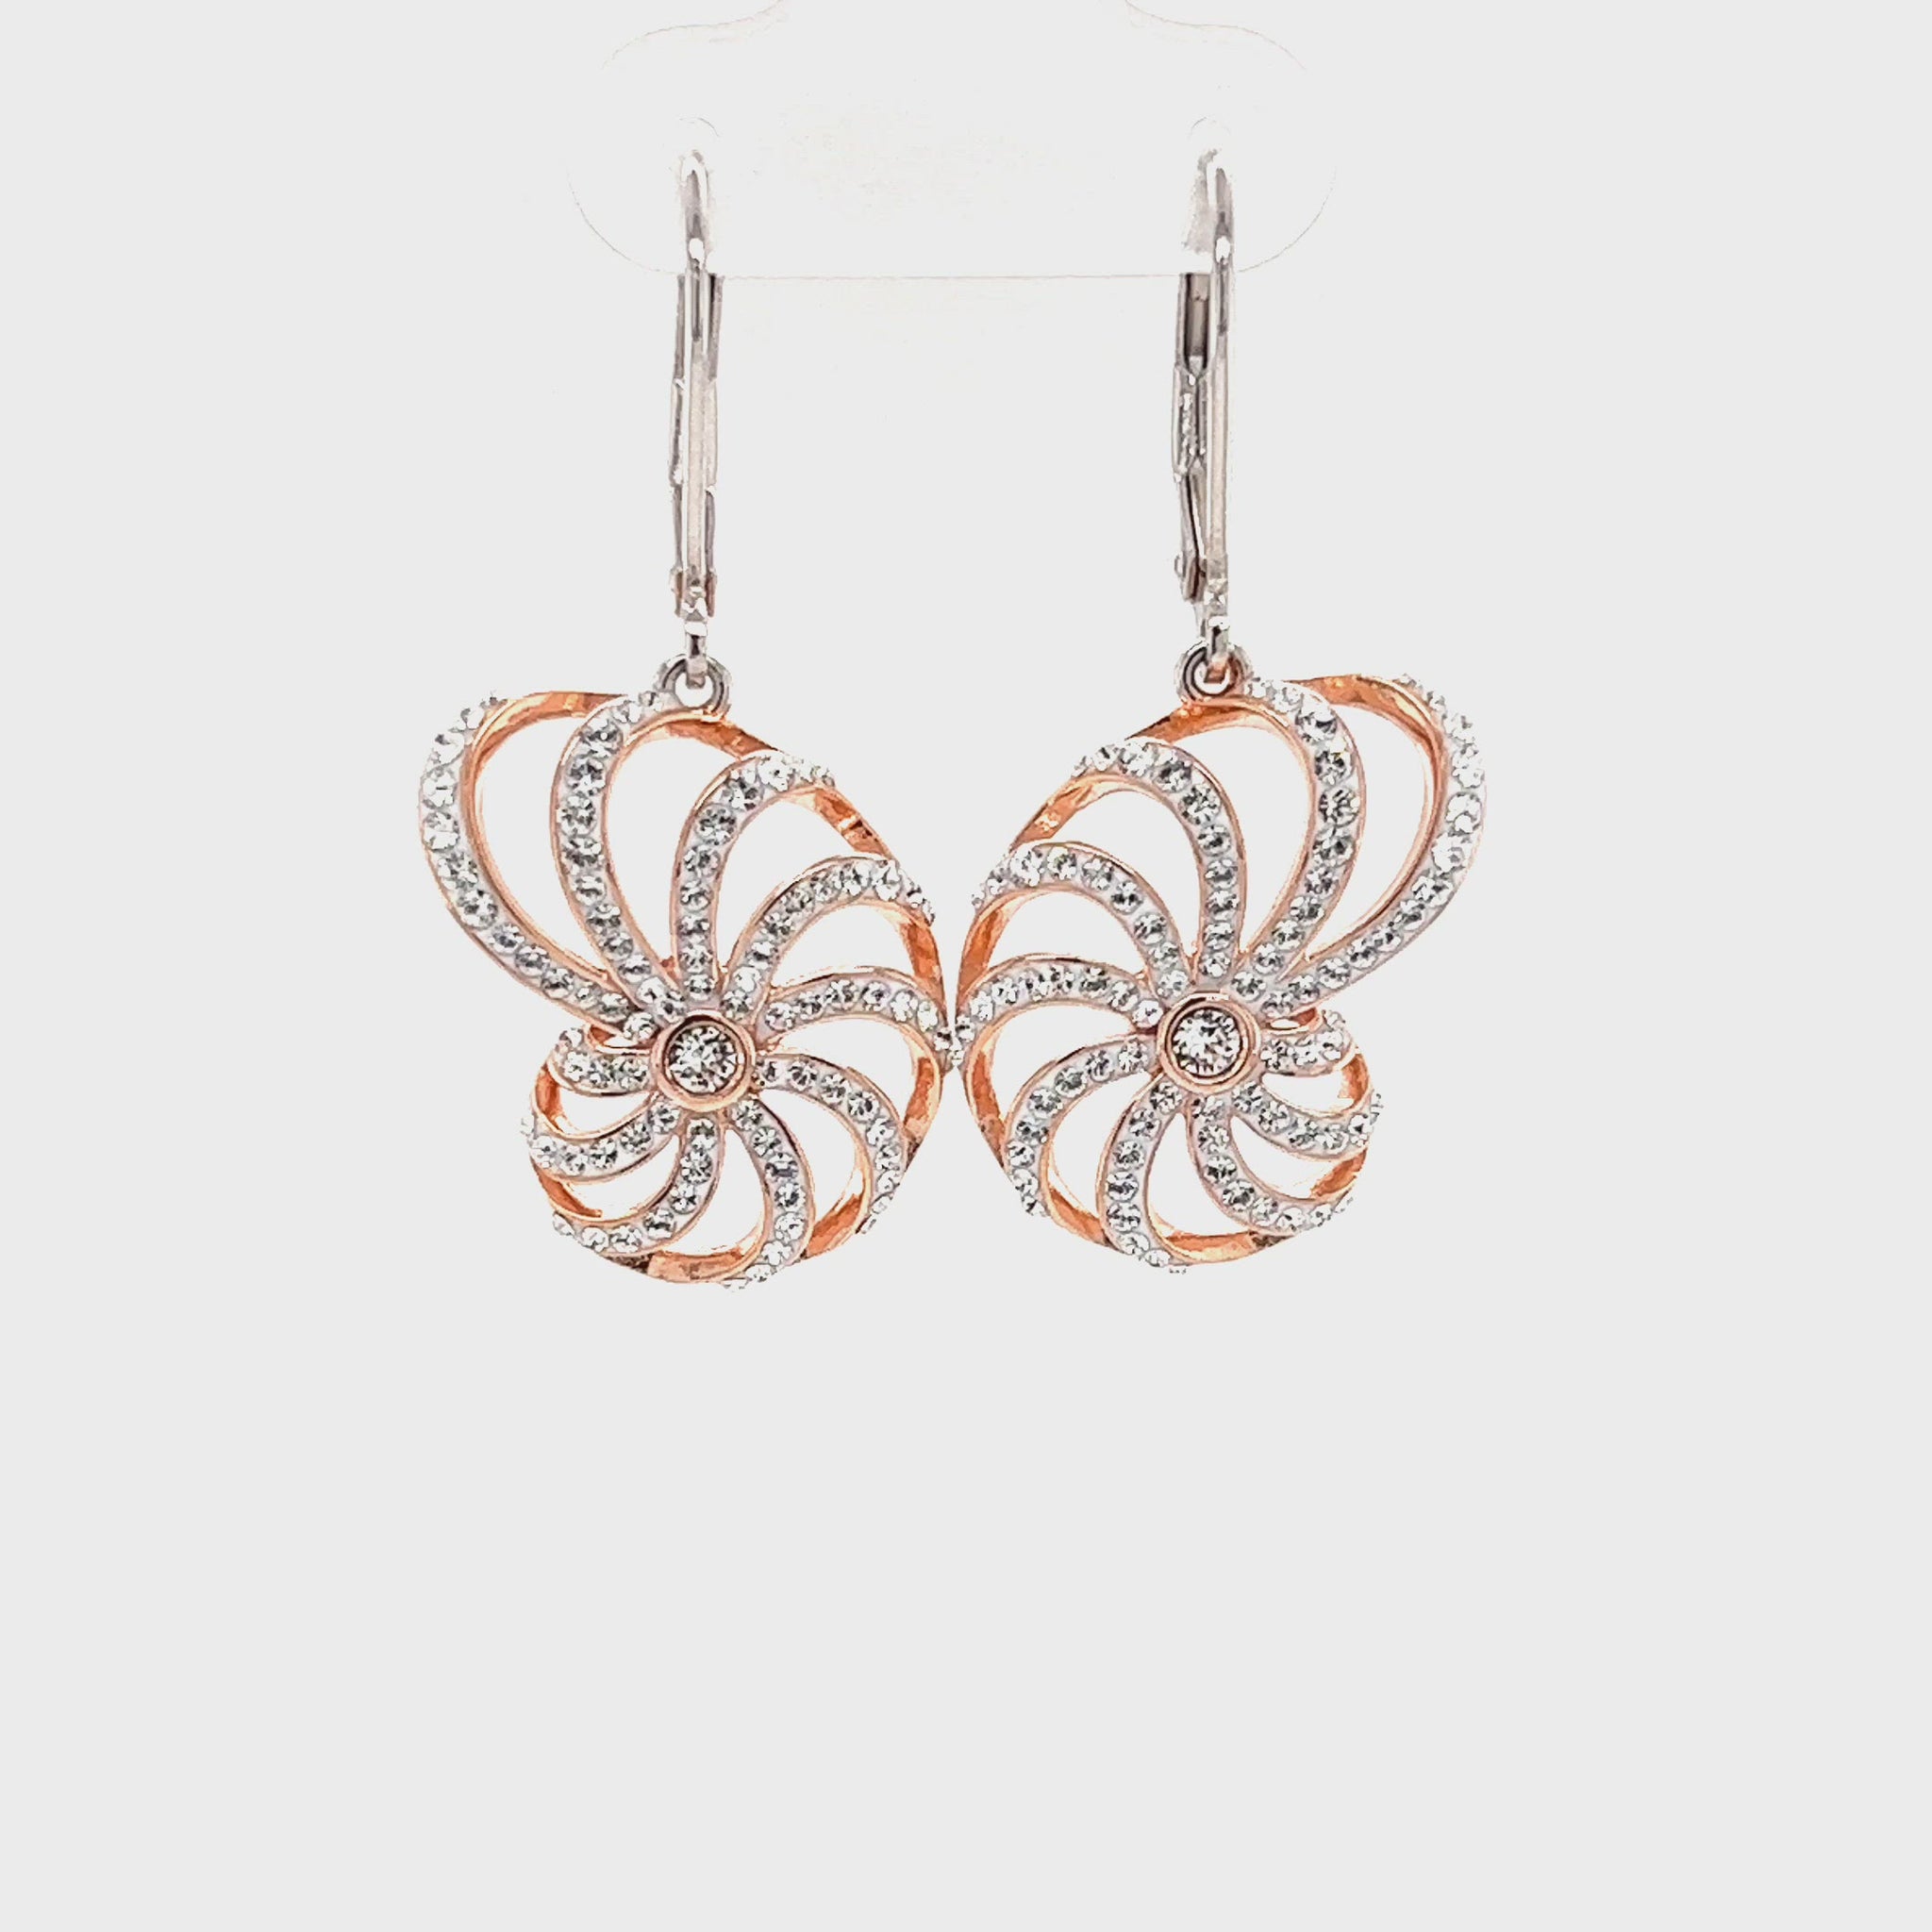 Nautilus Shell Dangle Earrings with Rose Gold Plate and White Crystals in Sterling Silver Video